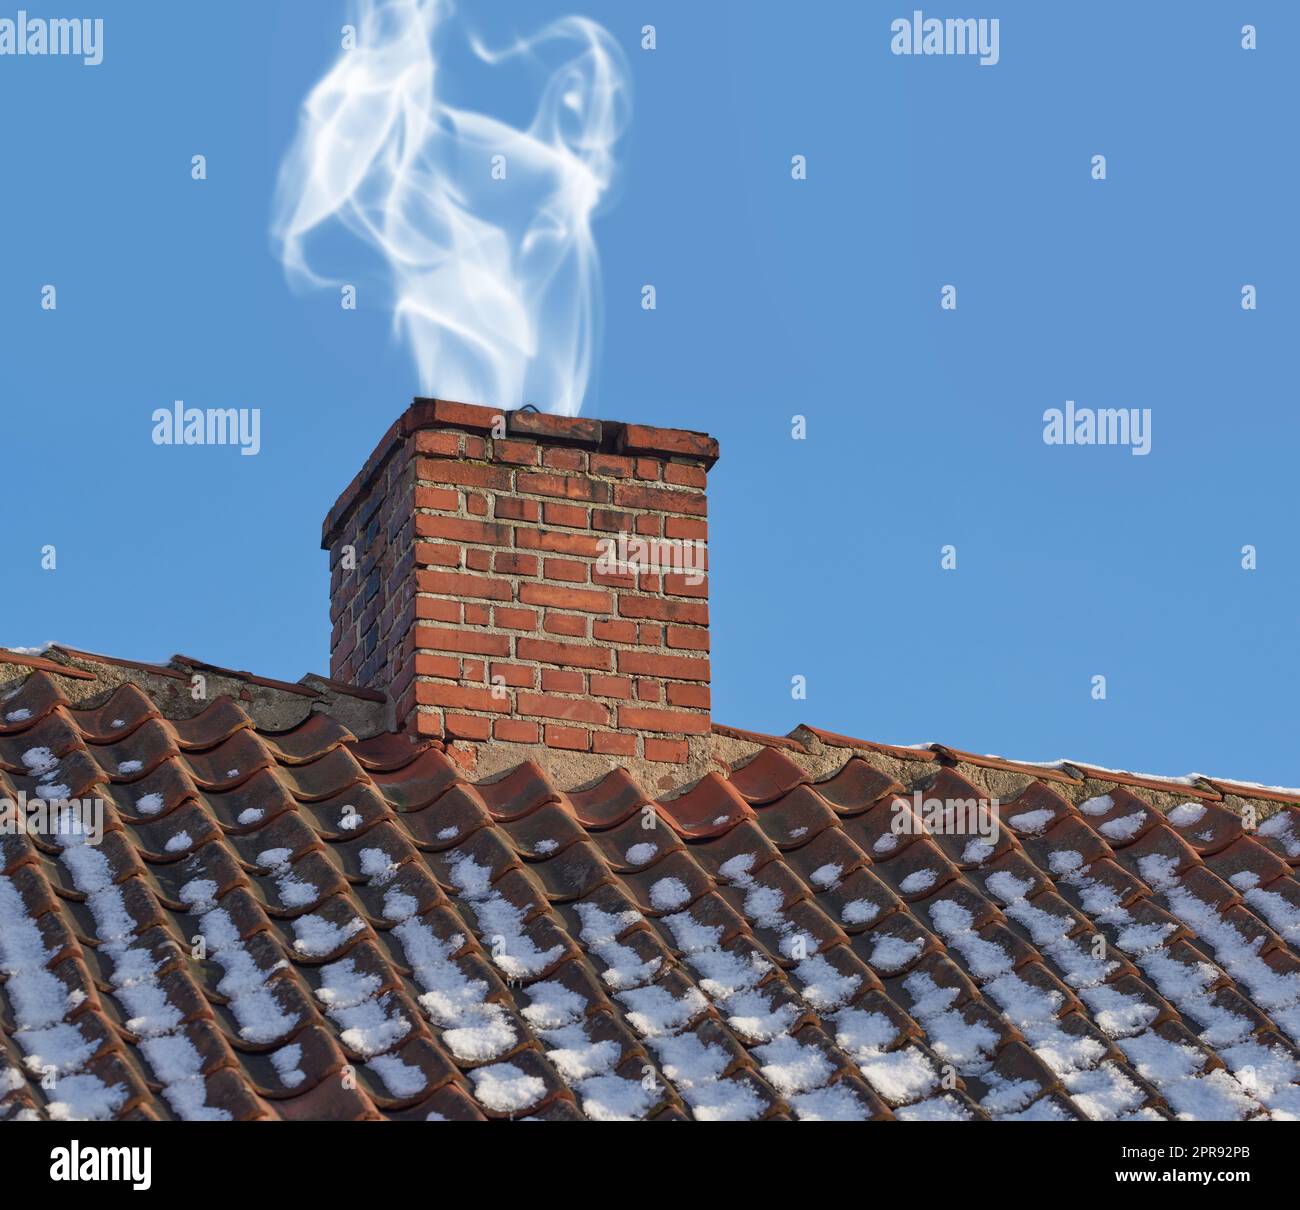 Landscape of chimney blowing smoke on house rooftop exterior design in Denmark during winter. Close up of old architecture redbrick air vent for removing heat and smoke from fireplace with blue sky Stock Photo